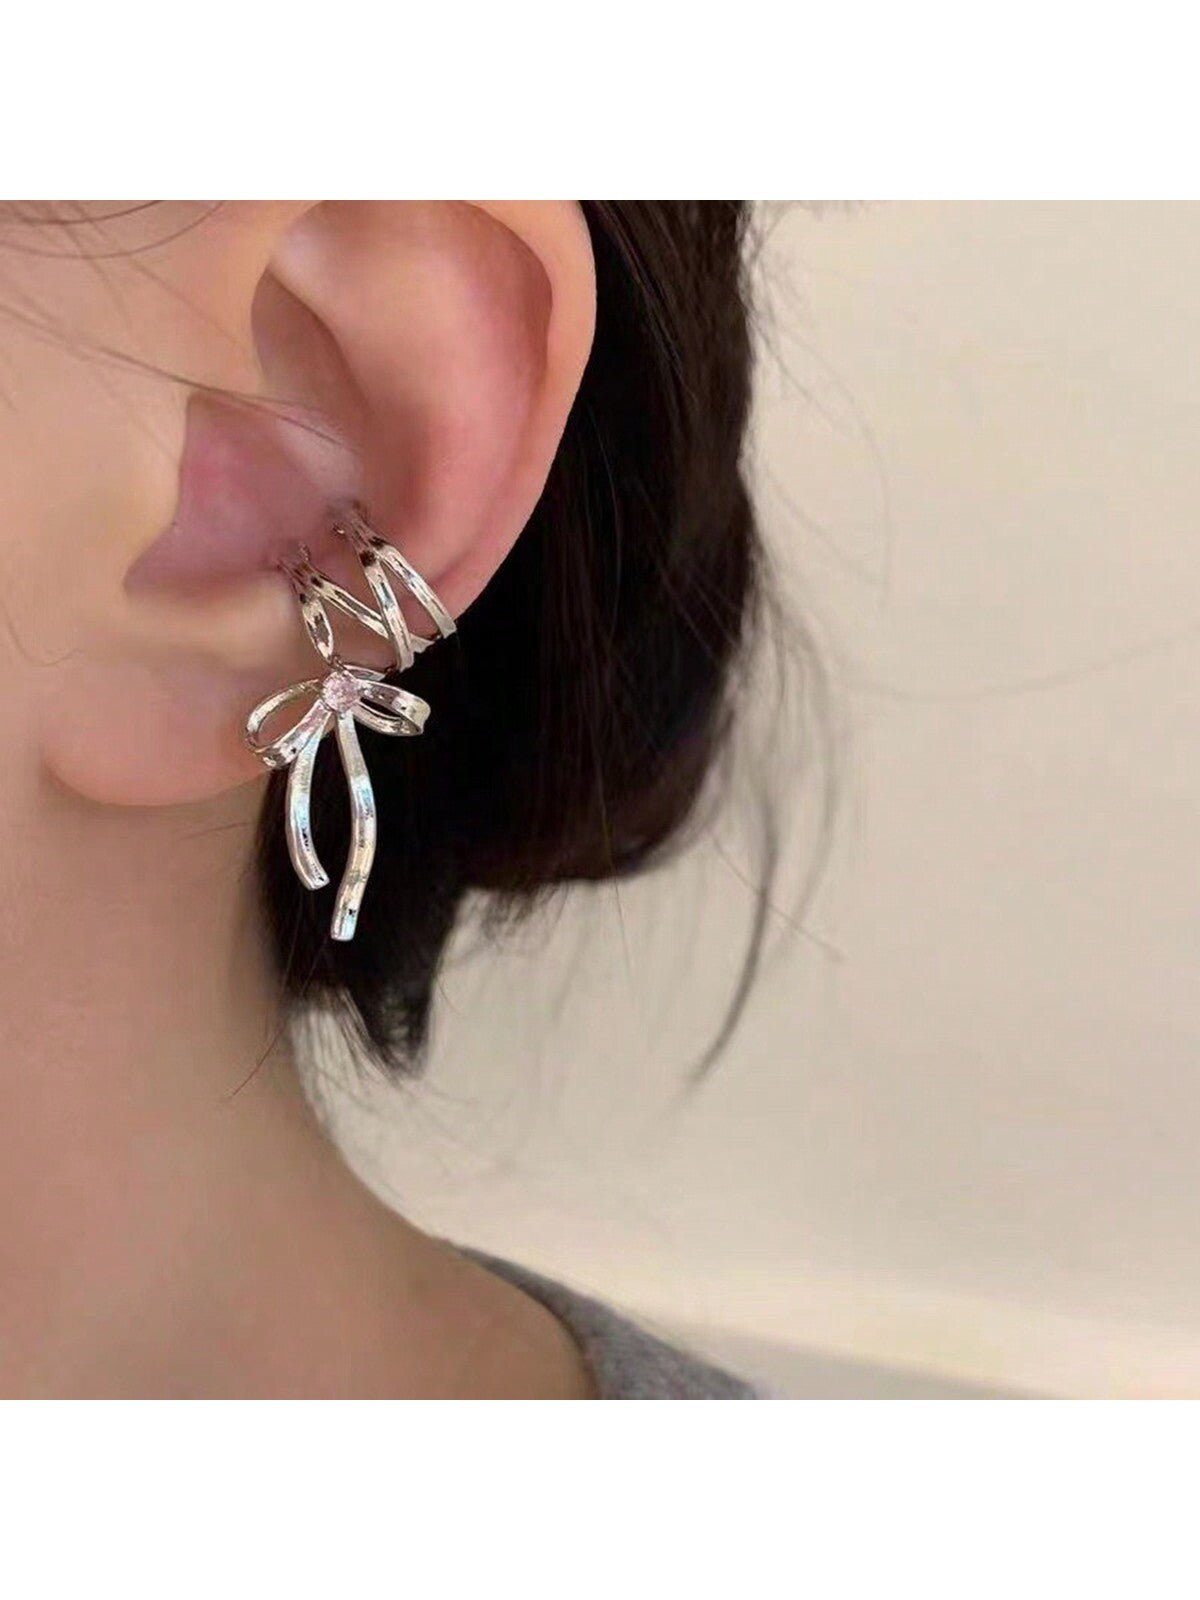 Ribbon Aesthetics|New Hollow Cross Ear Cuff With Cool Ballet Style Ribbon Bow Earrings For Women, 2pcs - Negative Apparel